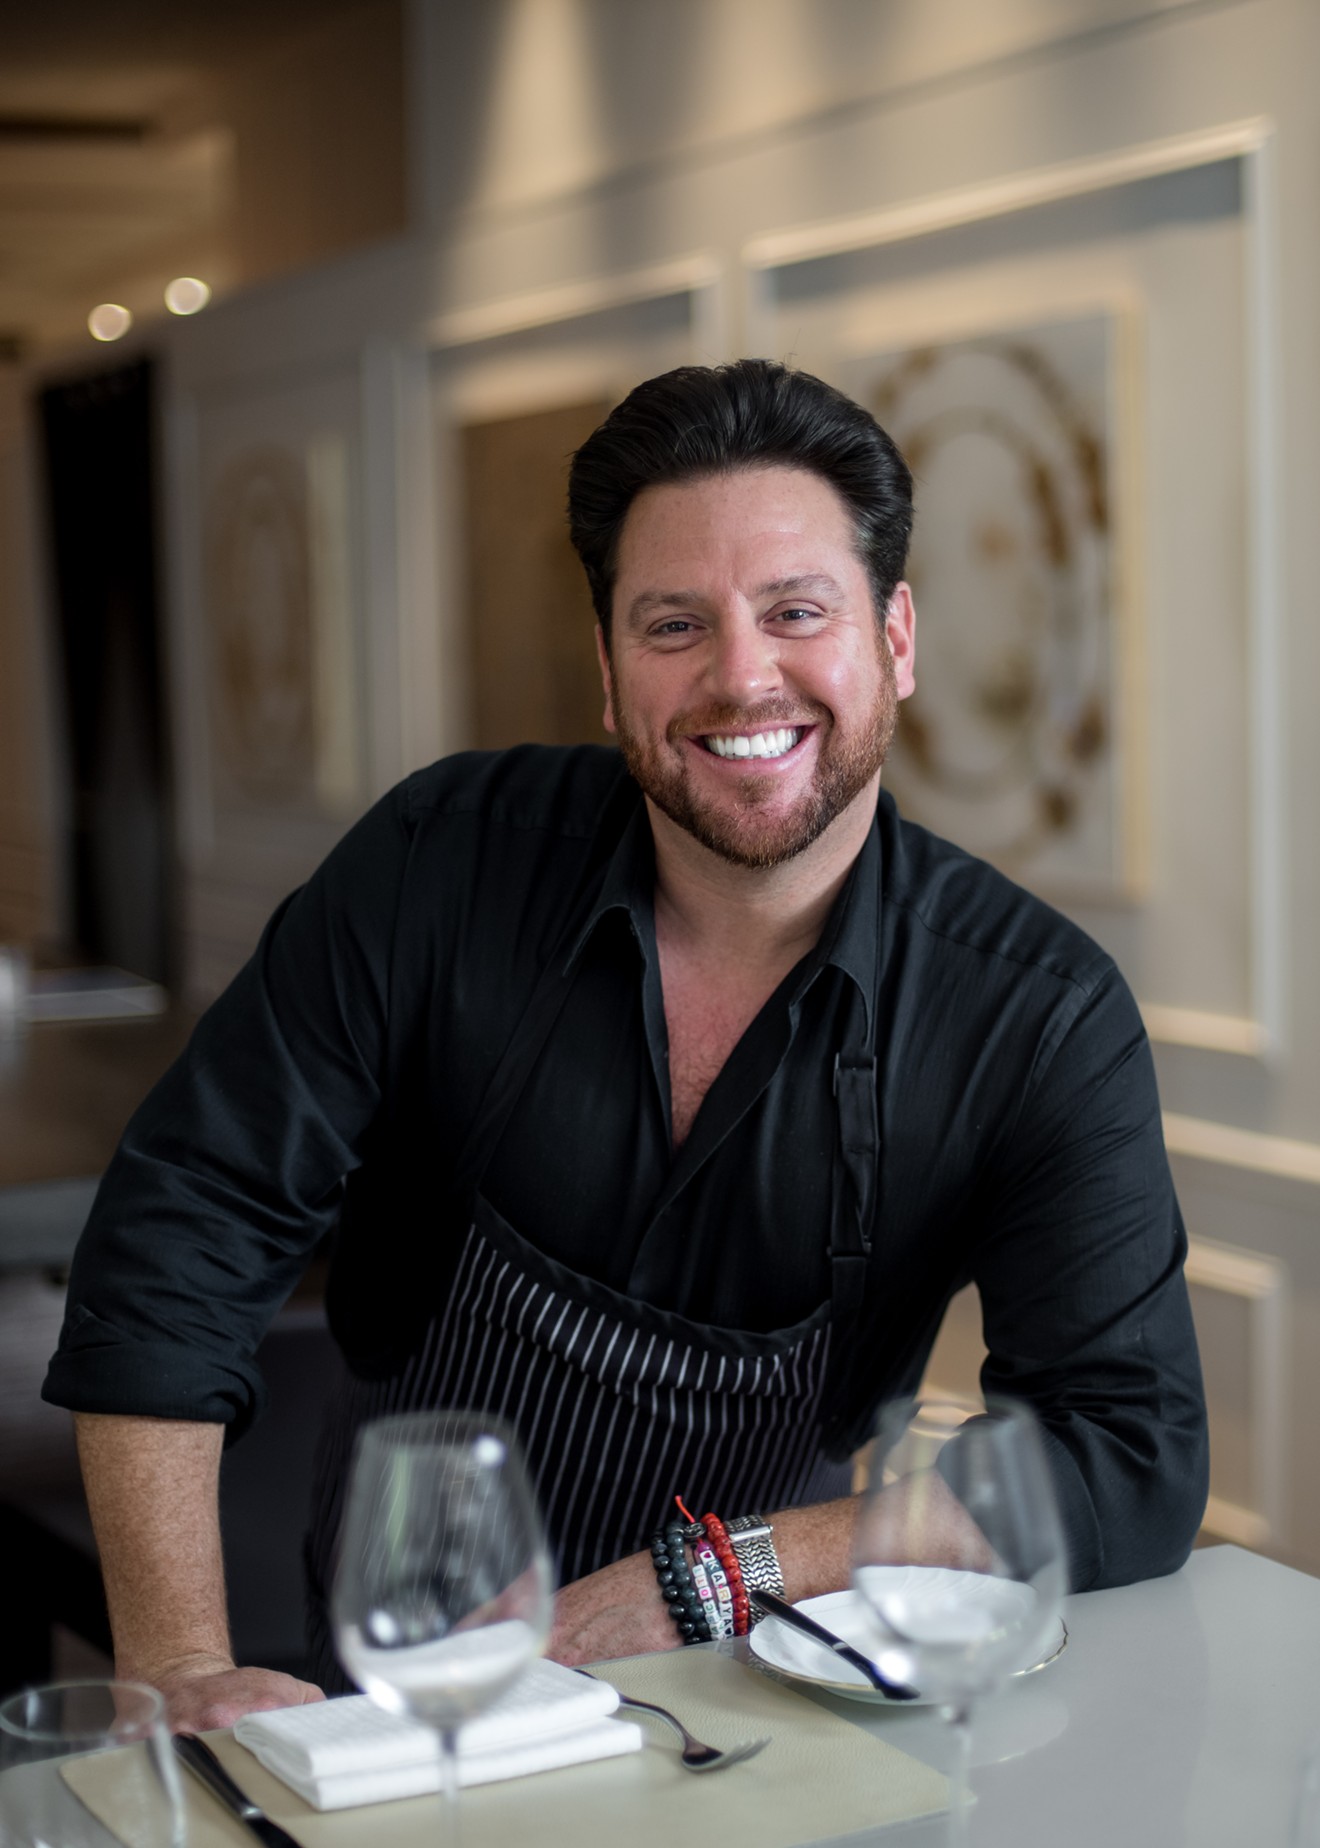 Chef Scott Conant talks about the thoughtful dishes and atmosphere at Mora Italian.